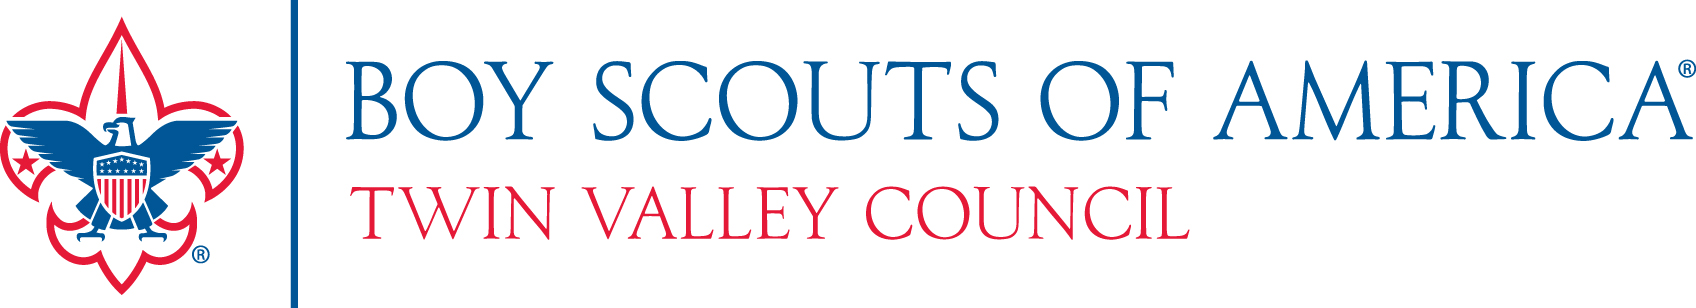 Twin Valley Council - Boy Scouts